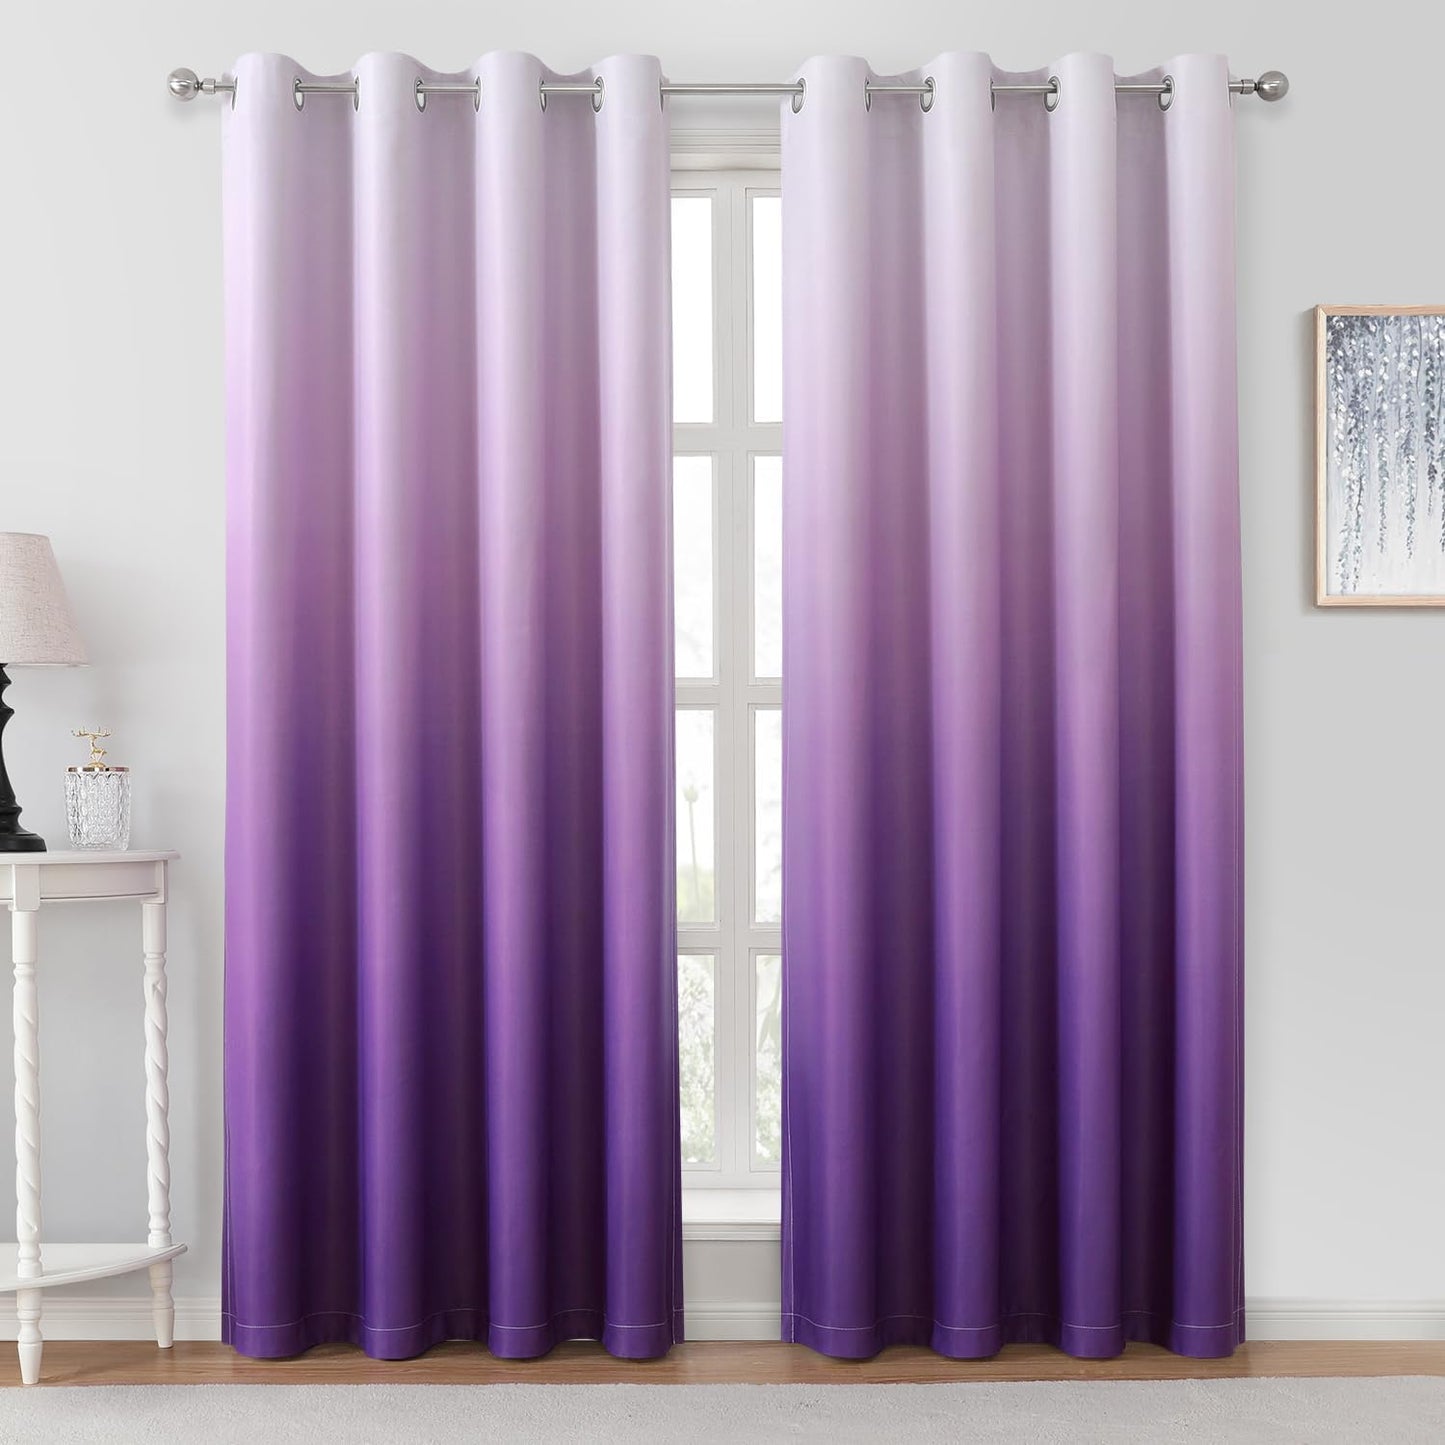 HOMEIDEAS Navy Blue Ombre Blackout Curtains 52 X 84 Inch Length Gradient Room Darkening Thermal Insulated Energy Saving Grommet 2 Panels Window Drapes for Living Room/Bedroom  HOMEIDEAS Purple 52"W X 84"L 